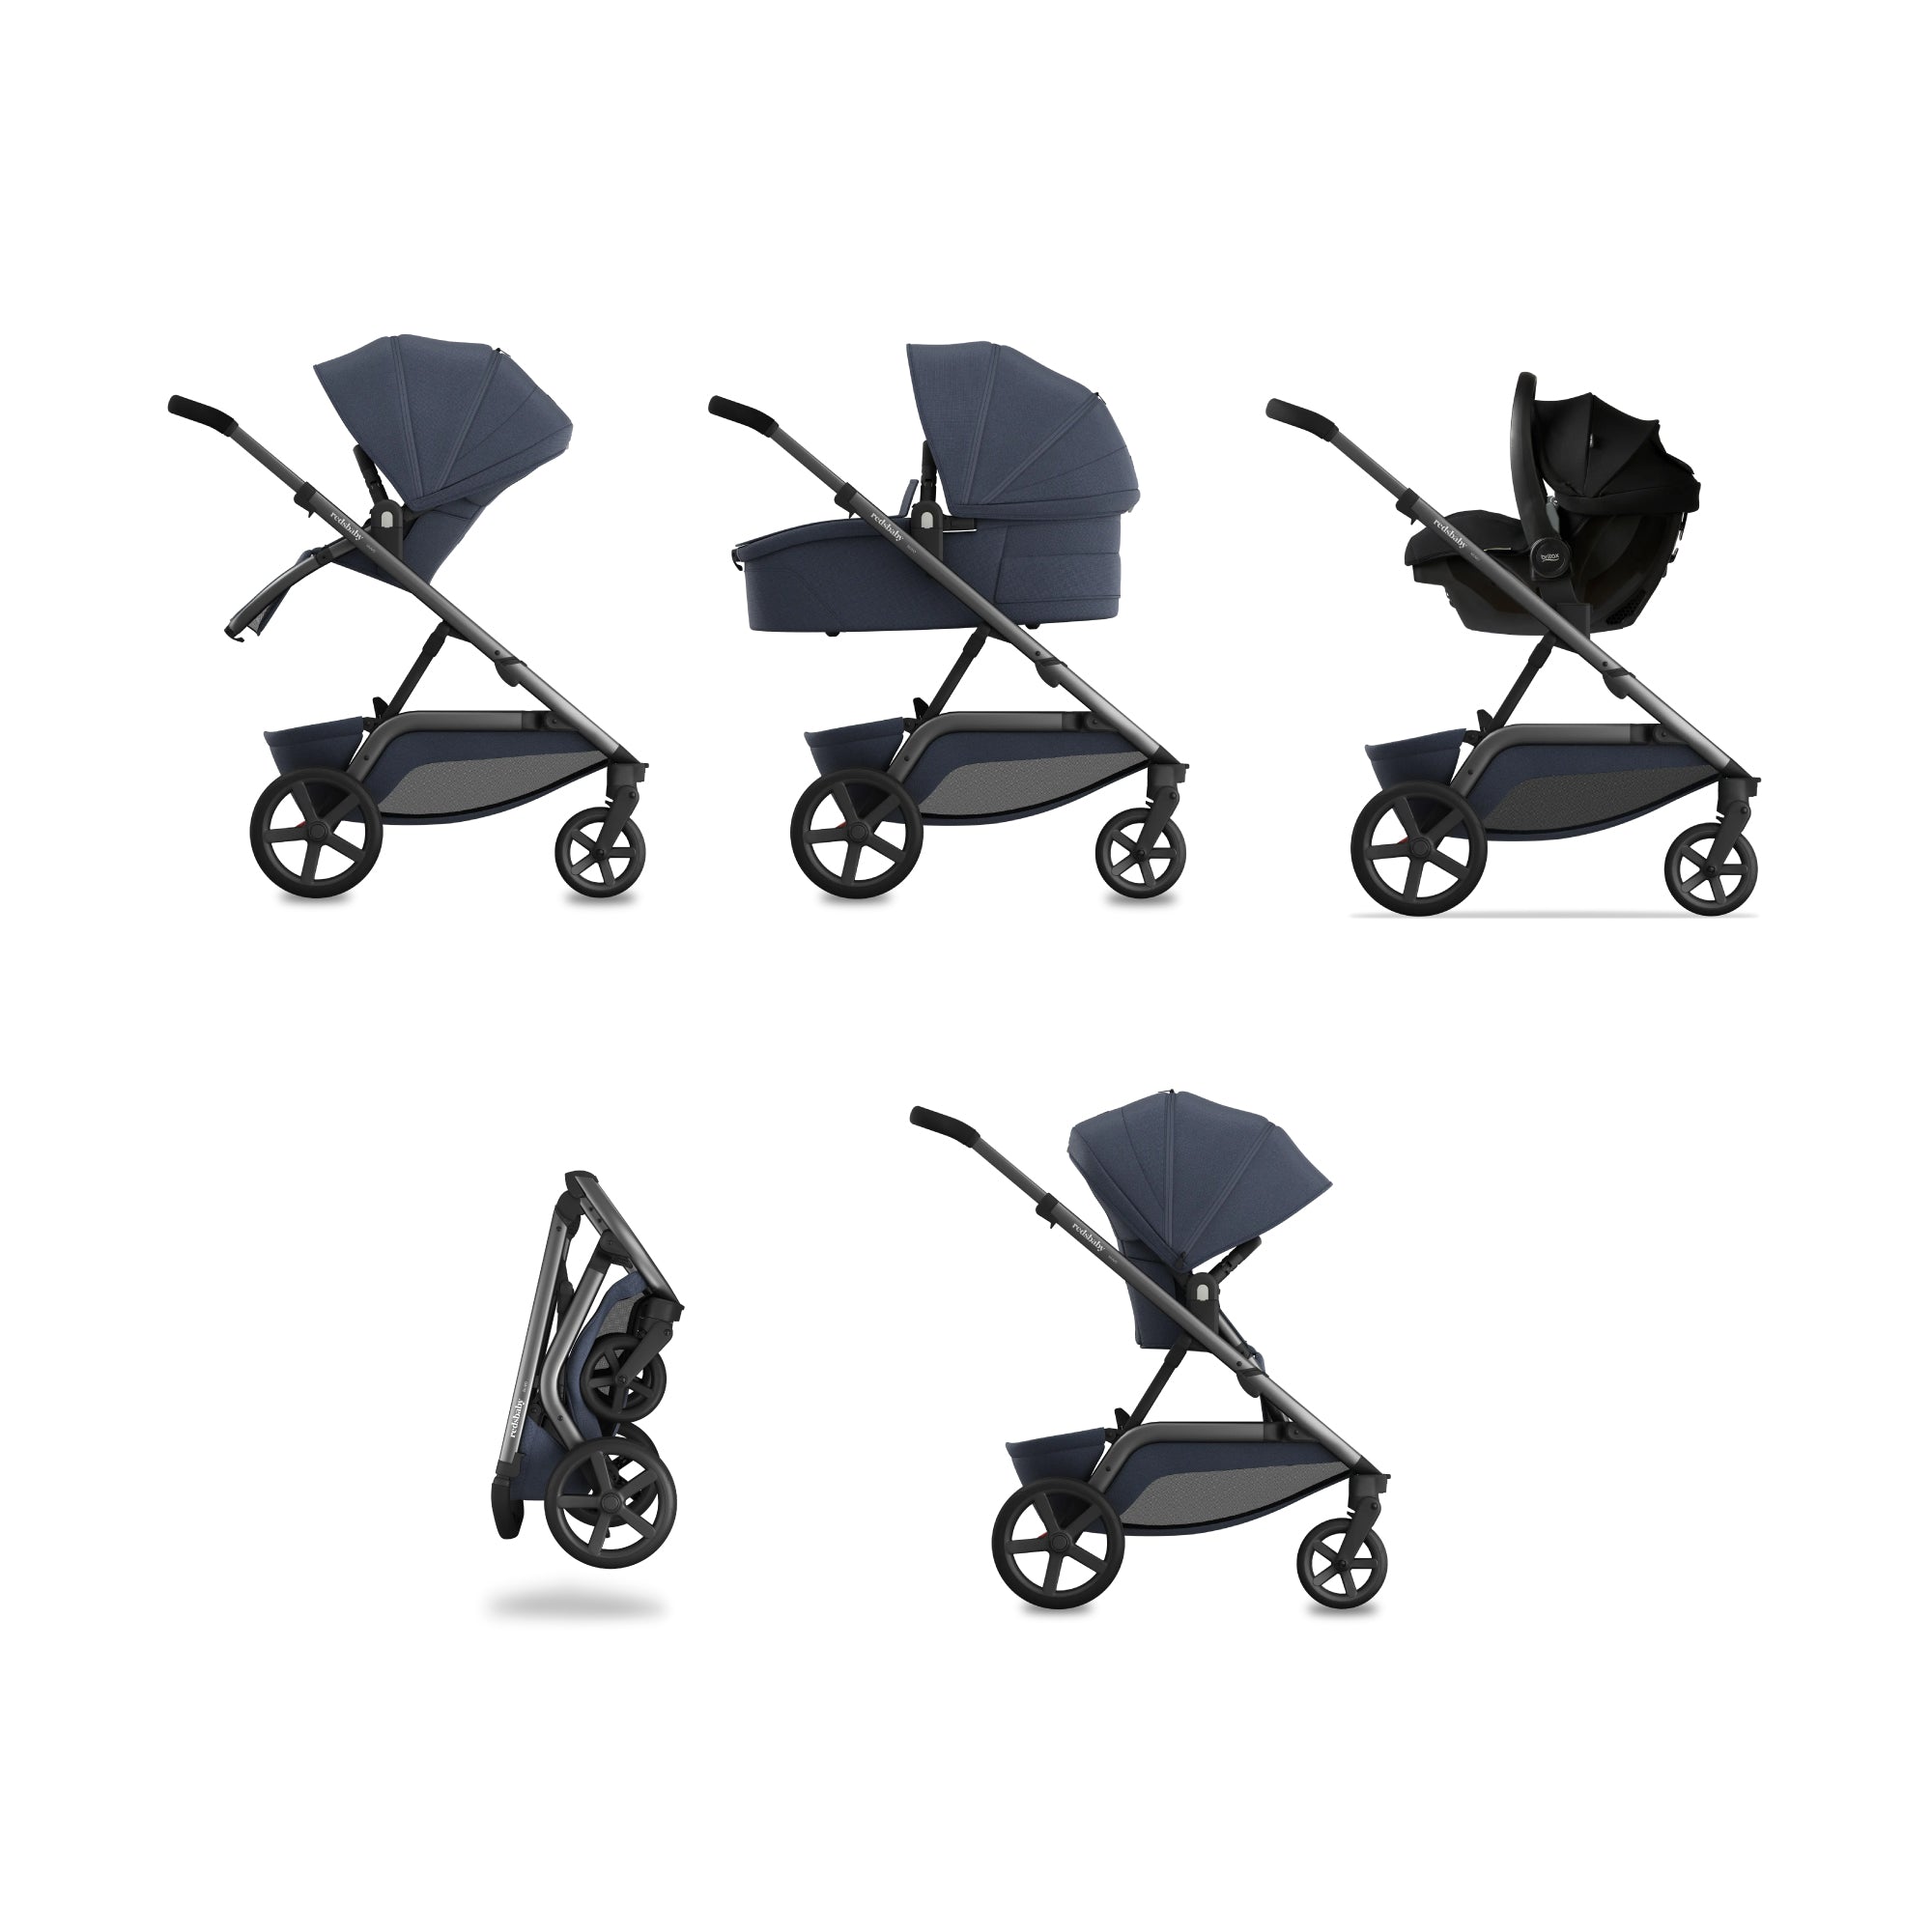 A compilation of five images displaying the Redsbaby NUVO stroller in various single configurations, showcasing its versatility. The first image features the stroller with an upright seat facing forward. The second shows the stroller with a bassinet attachment for an infant. The third portrays the stroller with the seat facing the parent. The fourth image captures the stroller in a compact, folded position, emphasizing its convenience for storage and transport. 